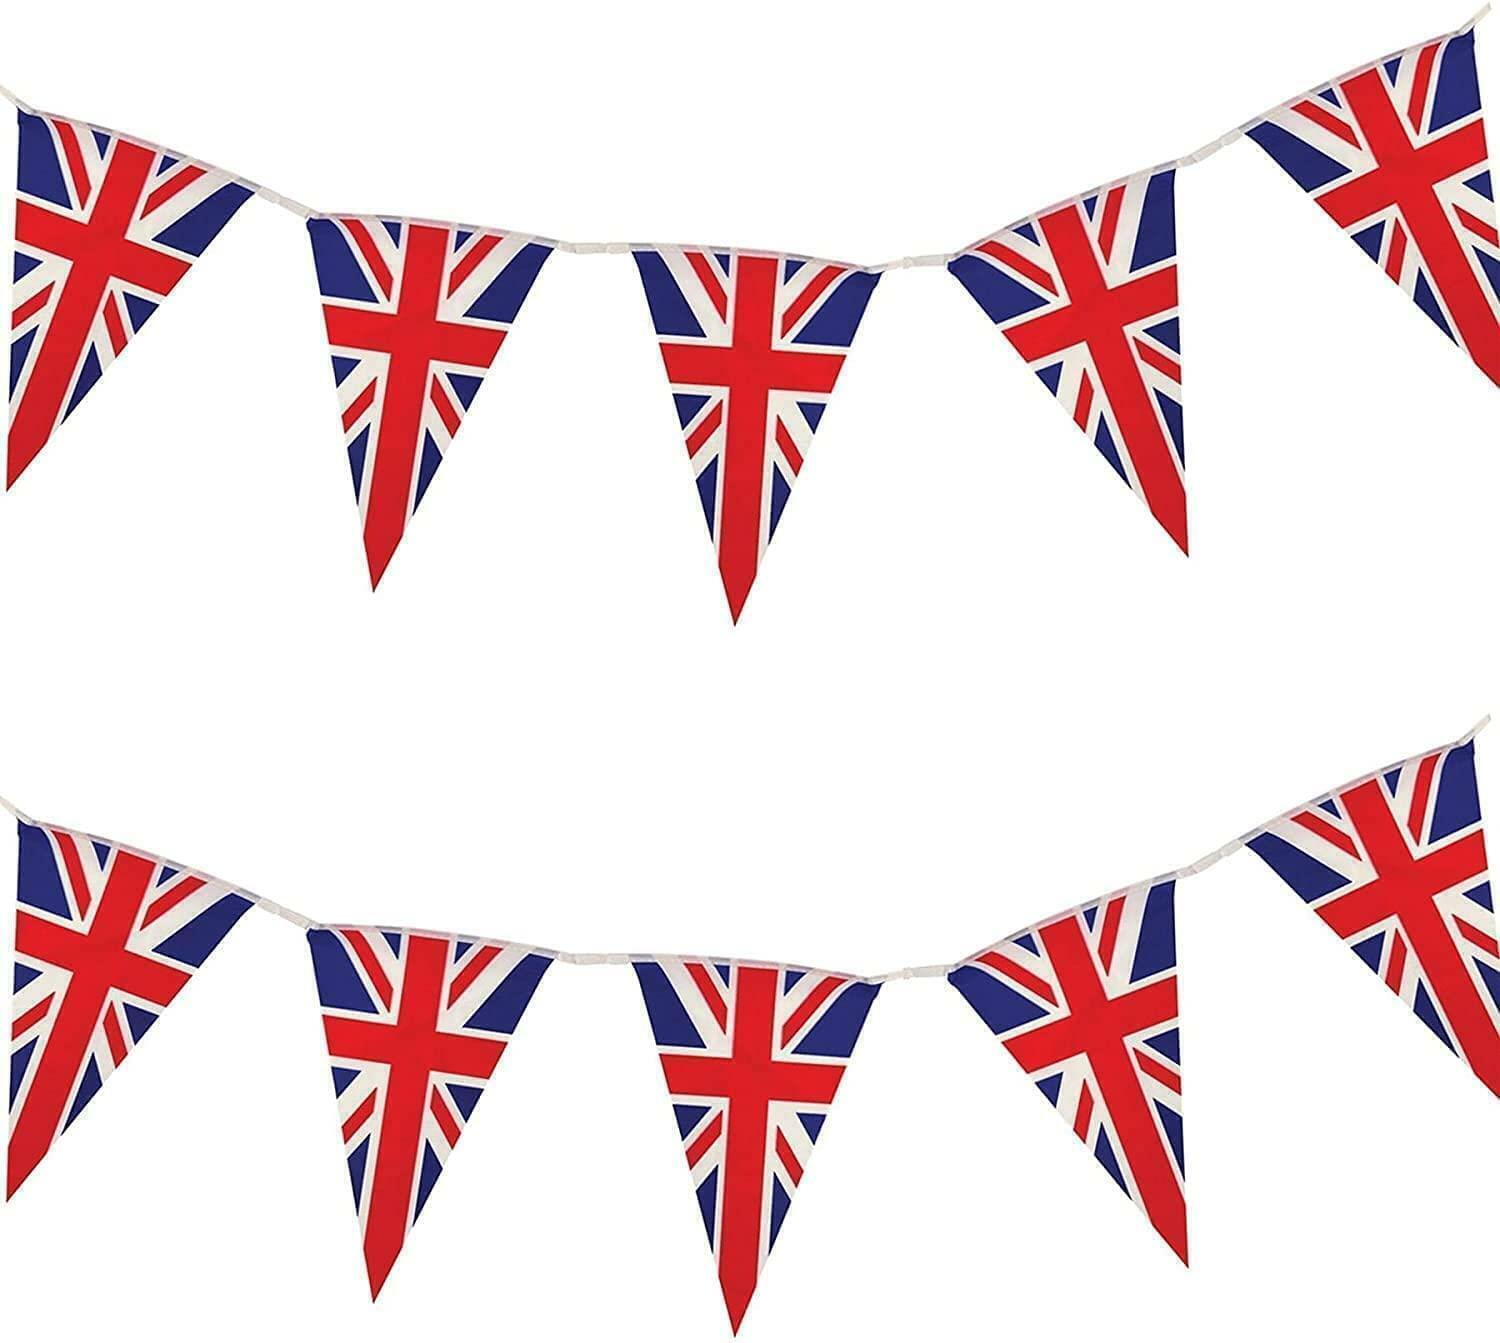 UNION JACK BUNTING FLAGS